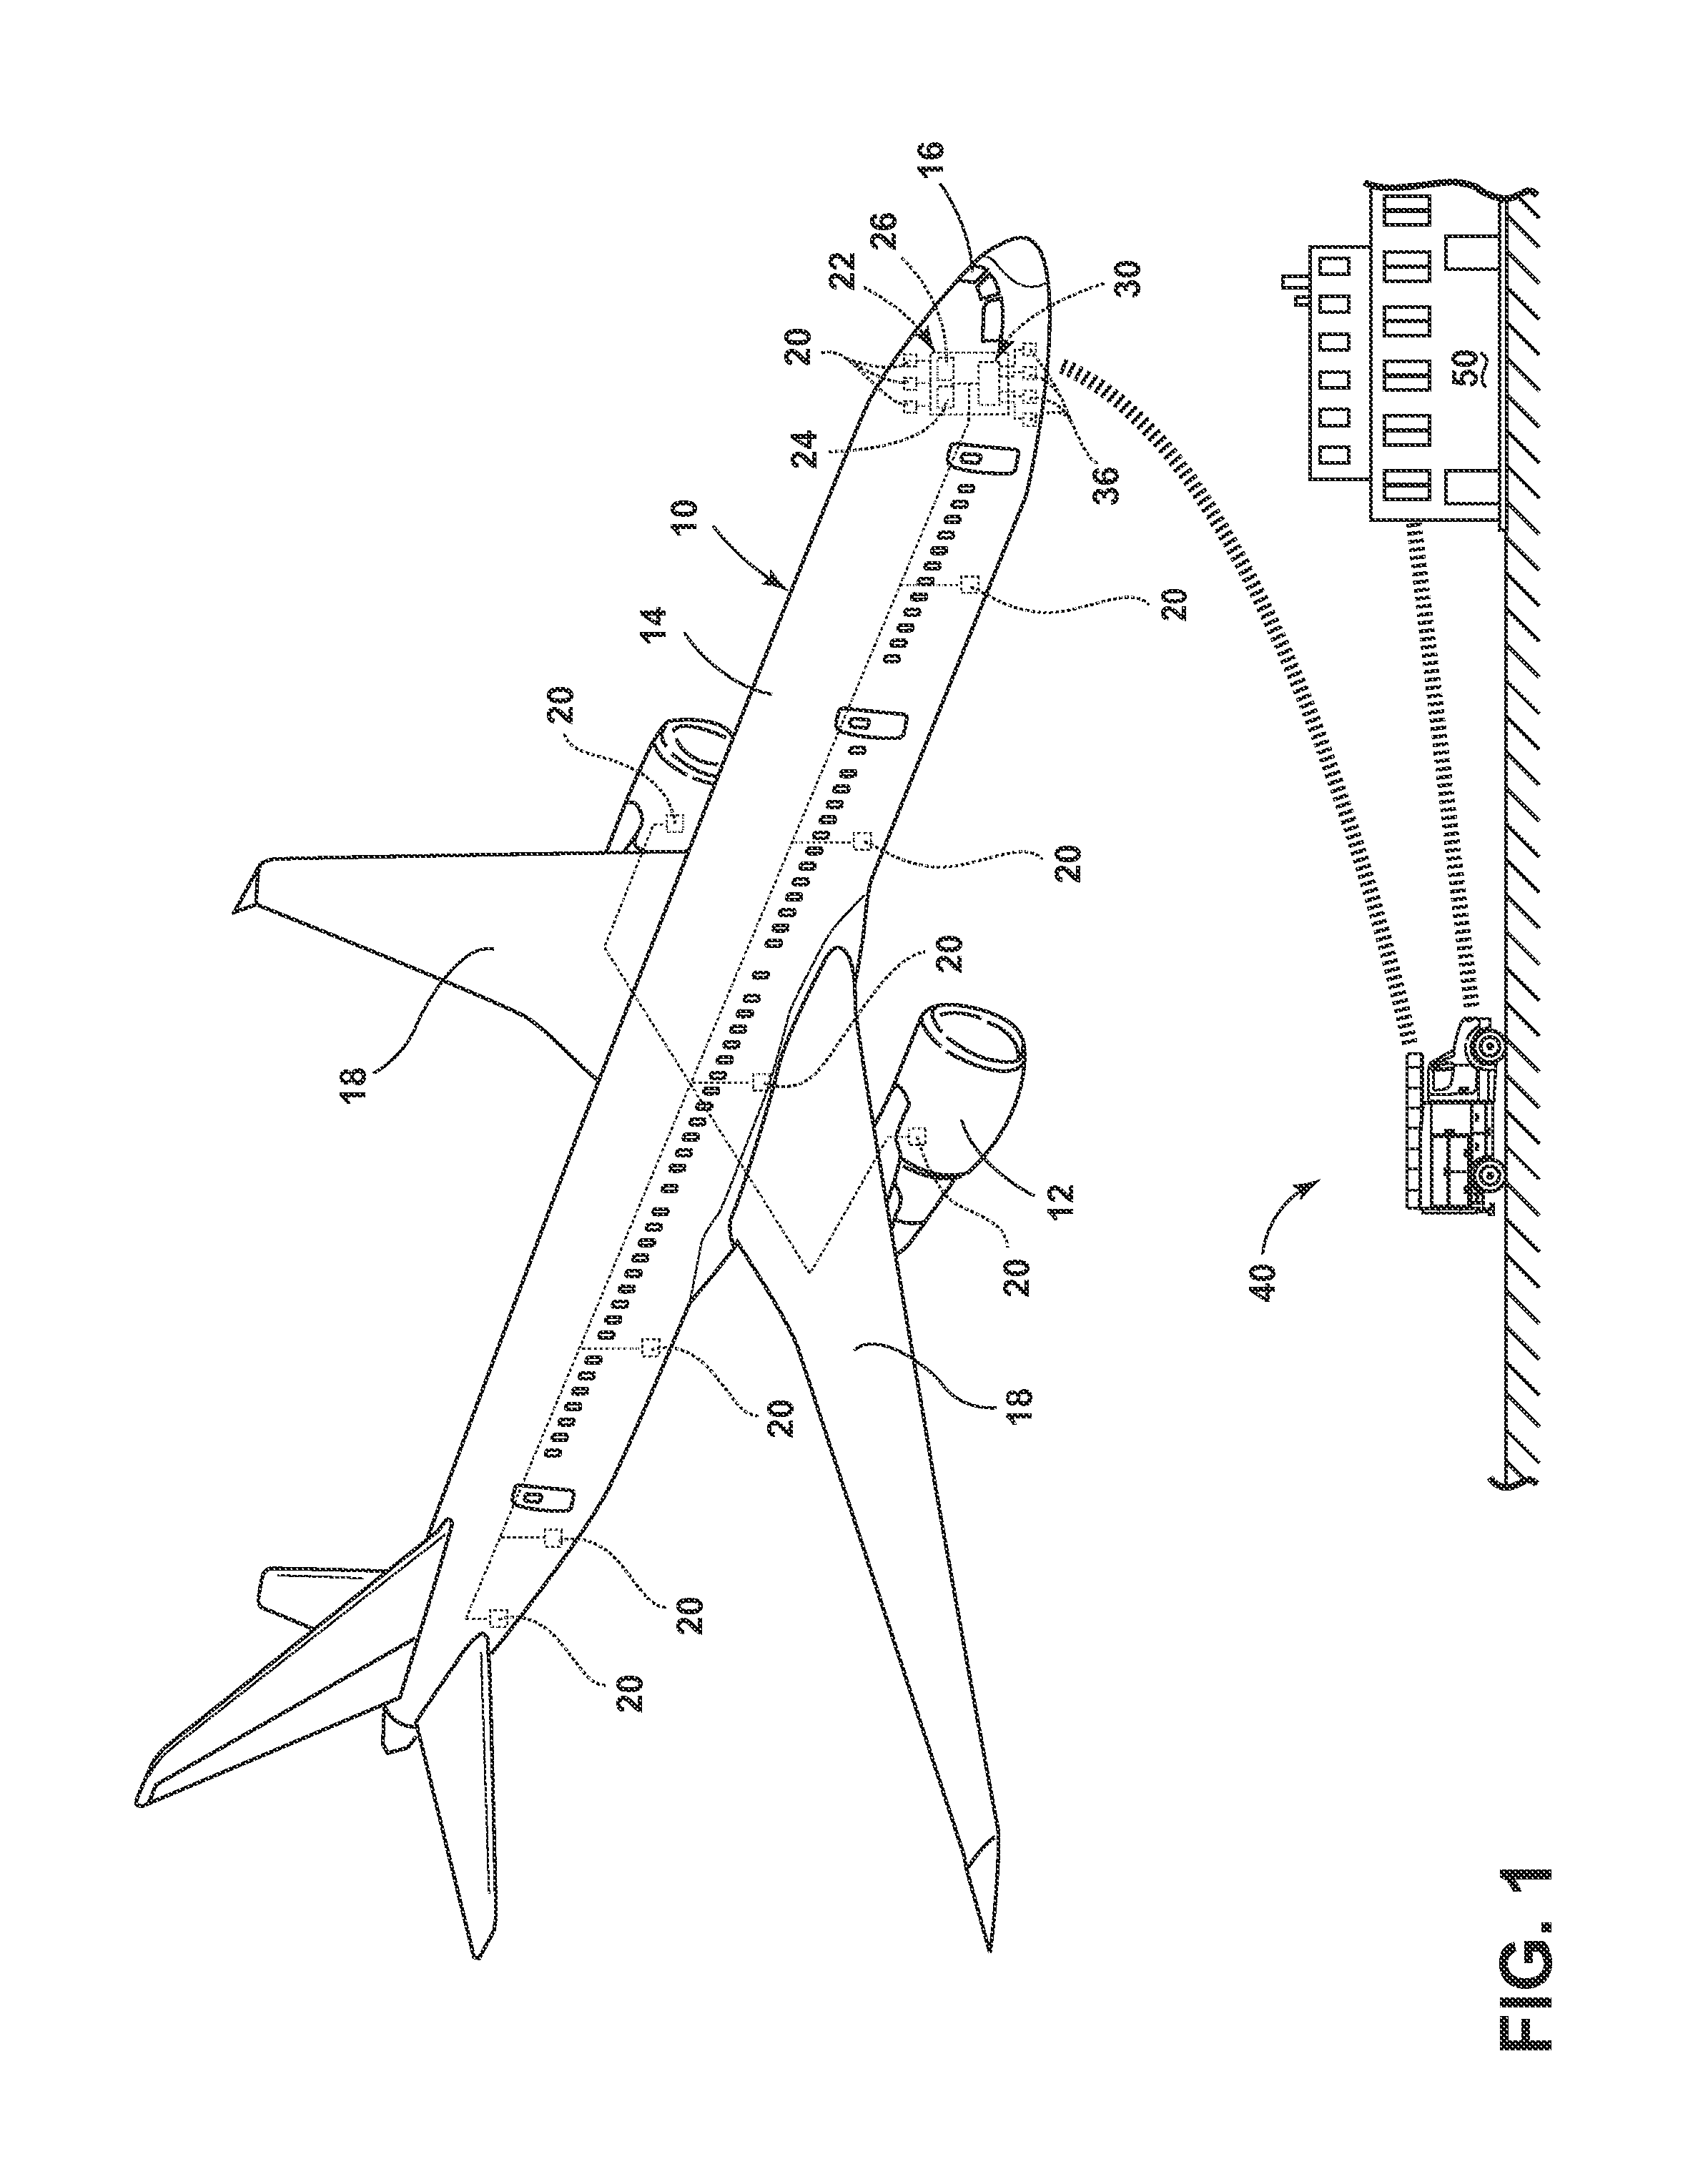 Method of identifying faults in an aircraft